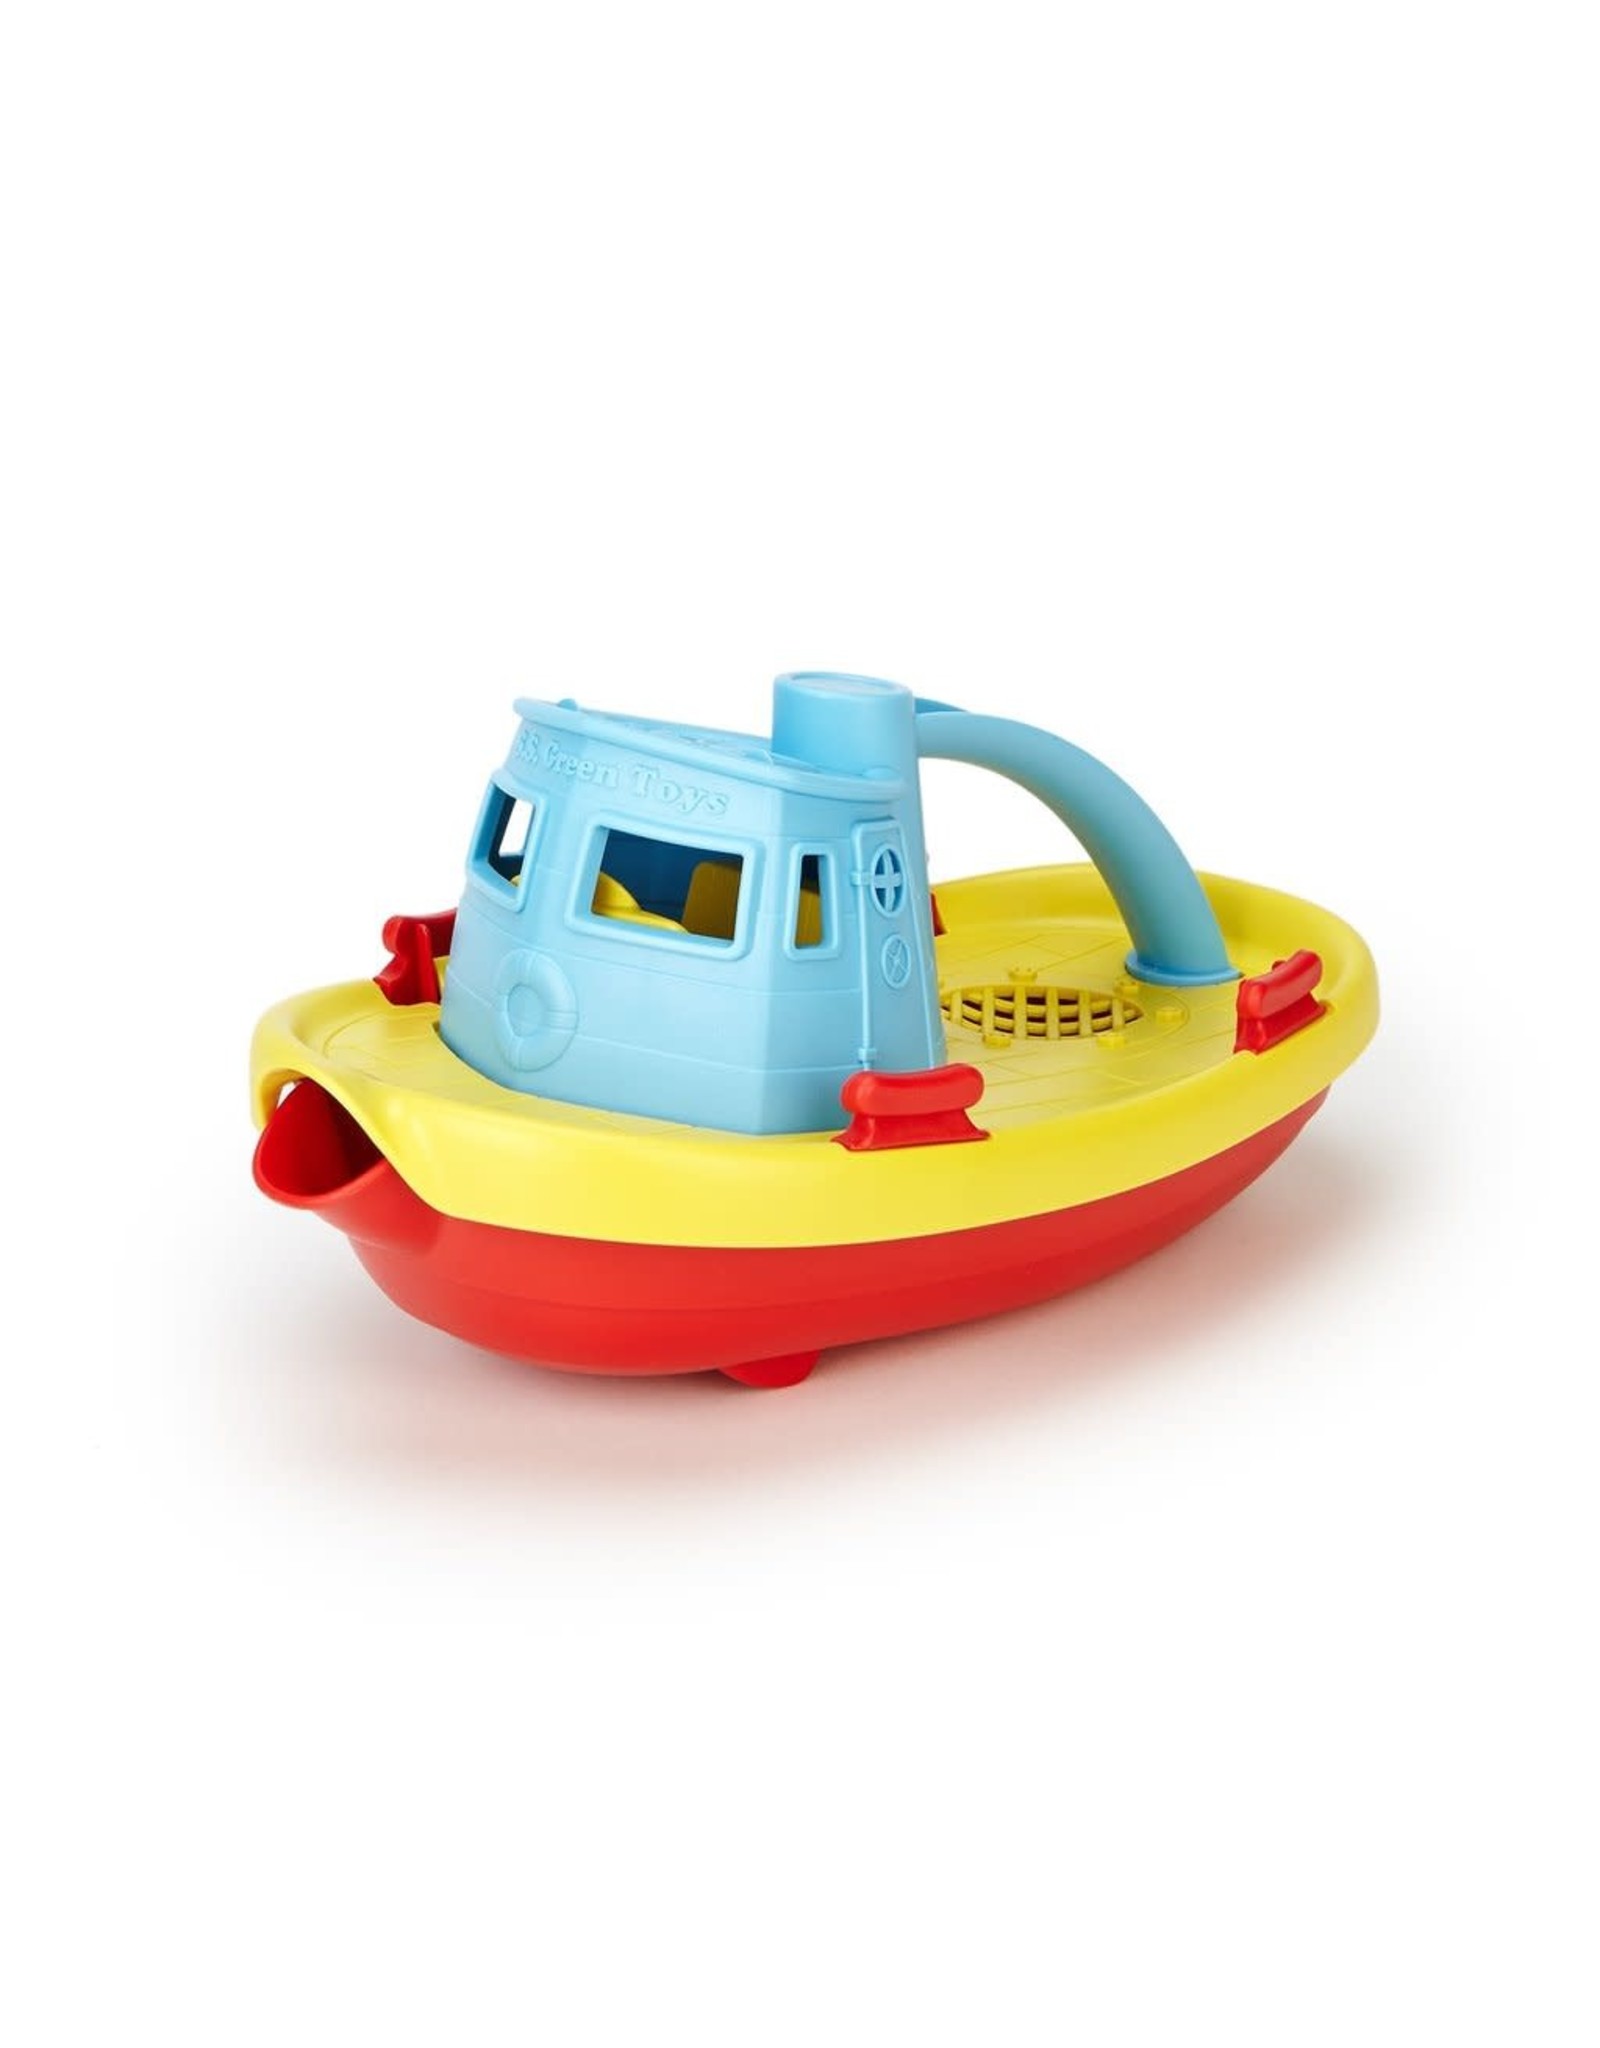 Green Toys Green Toys Tugboat Assorted